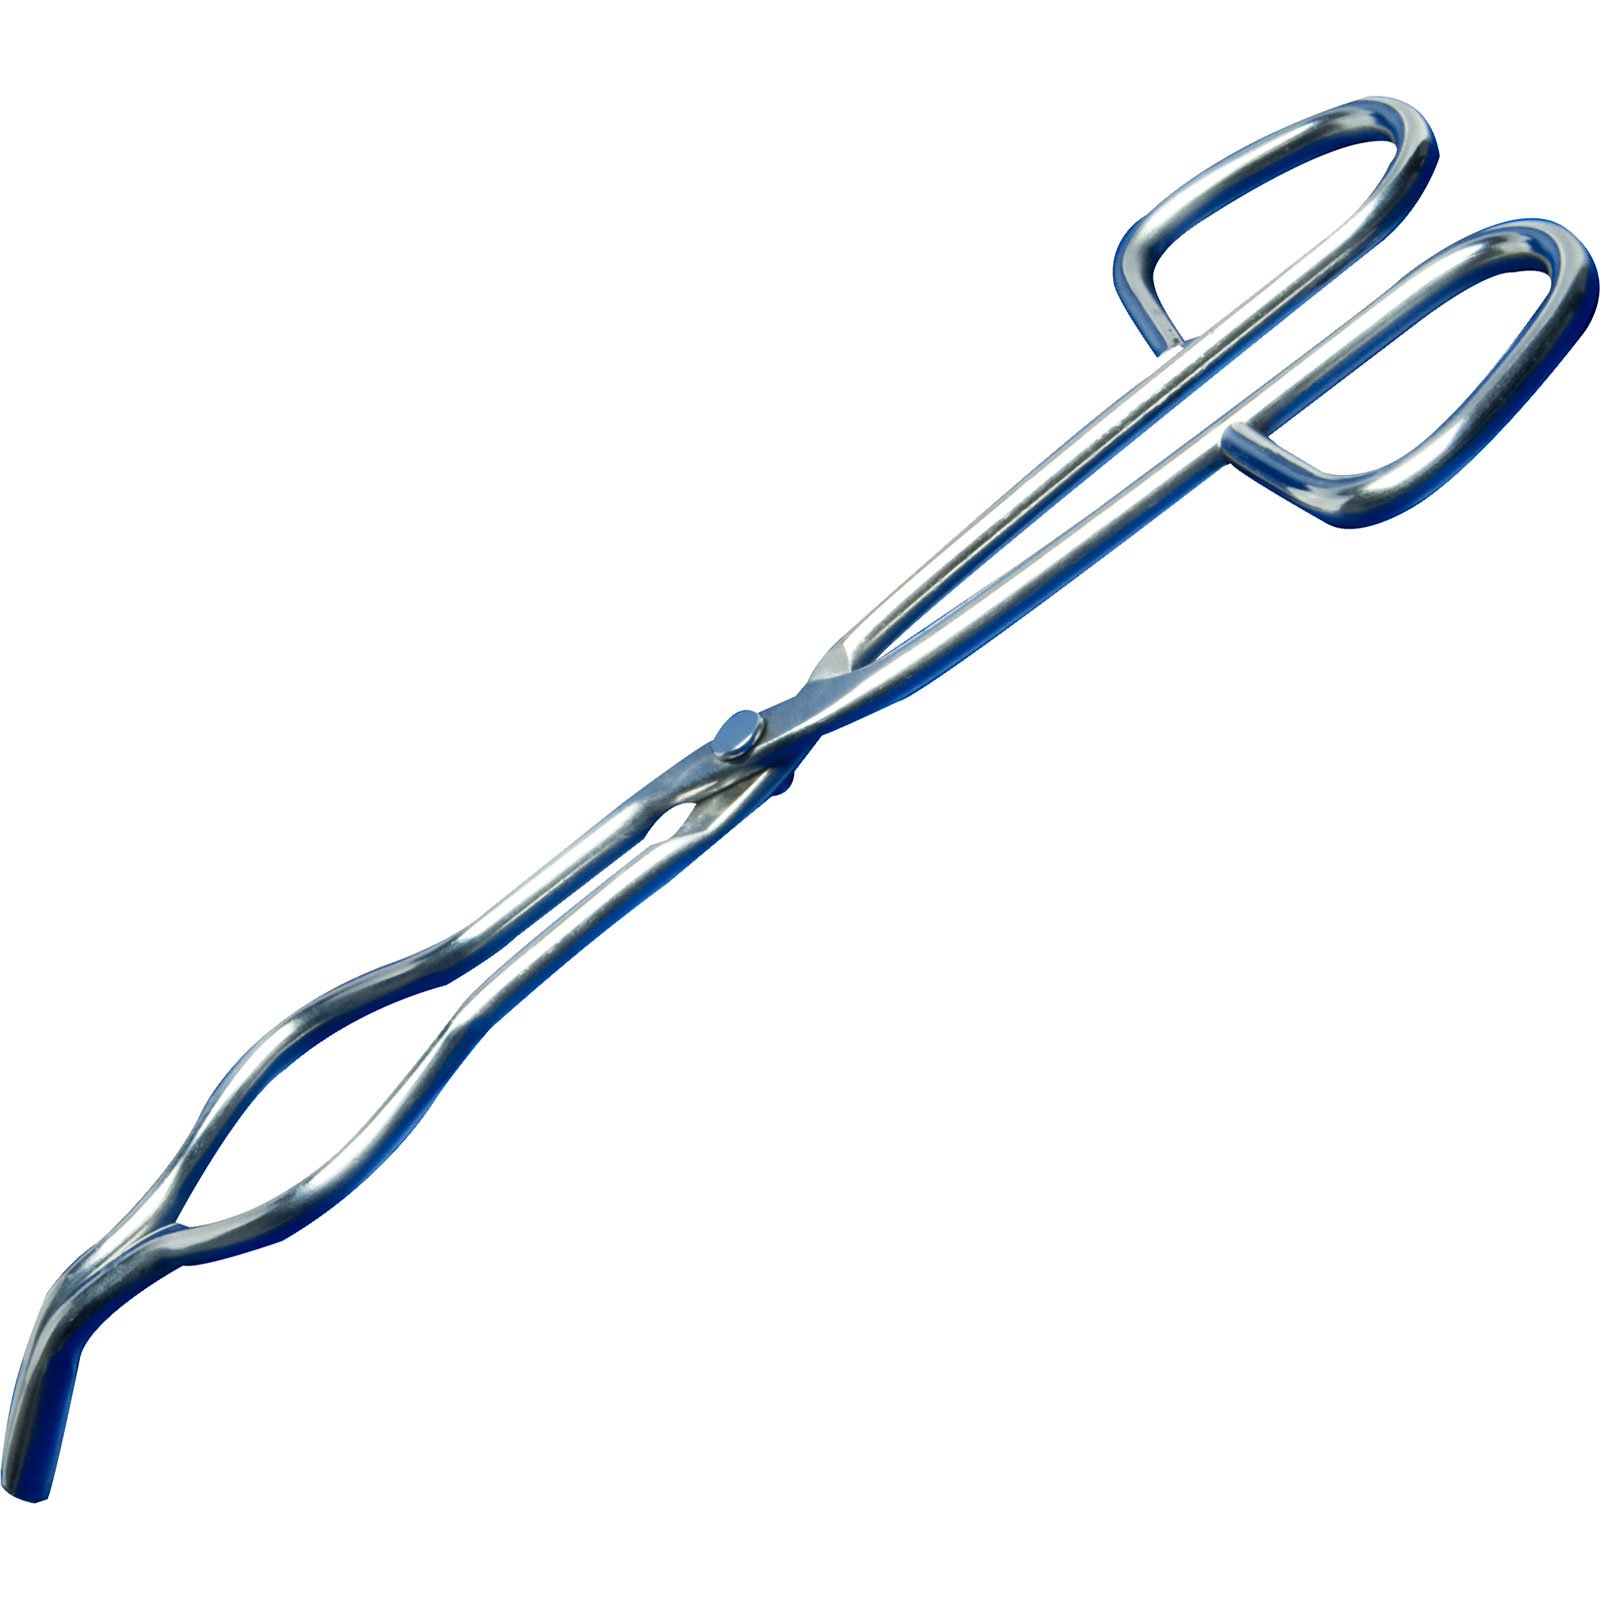 Crucible Tongs, Stainless Steel